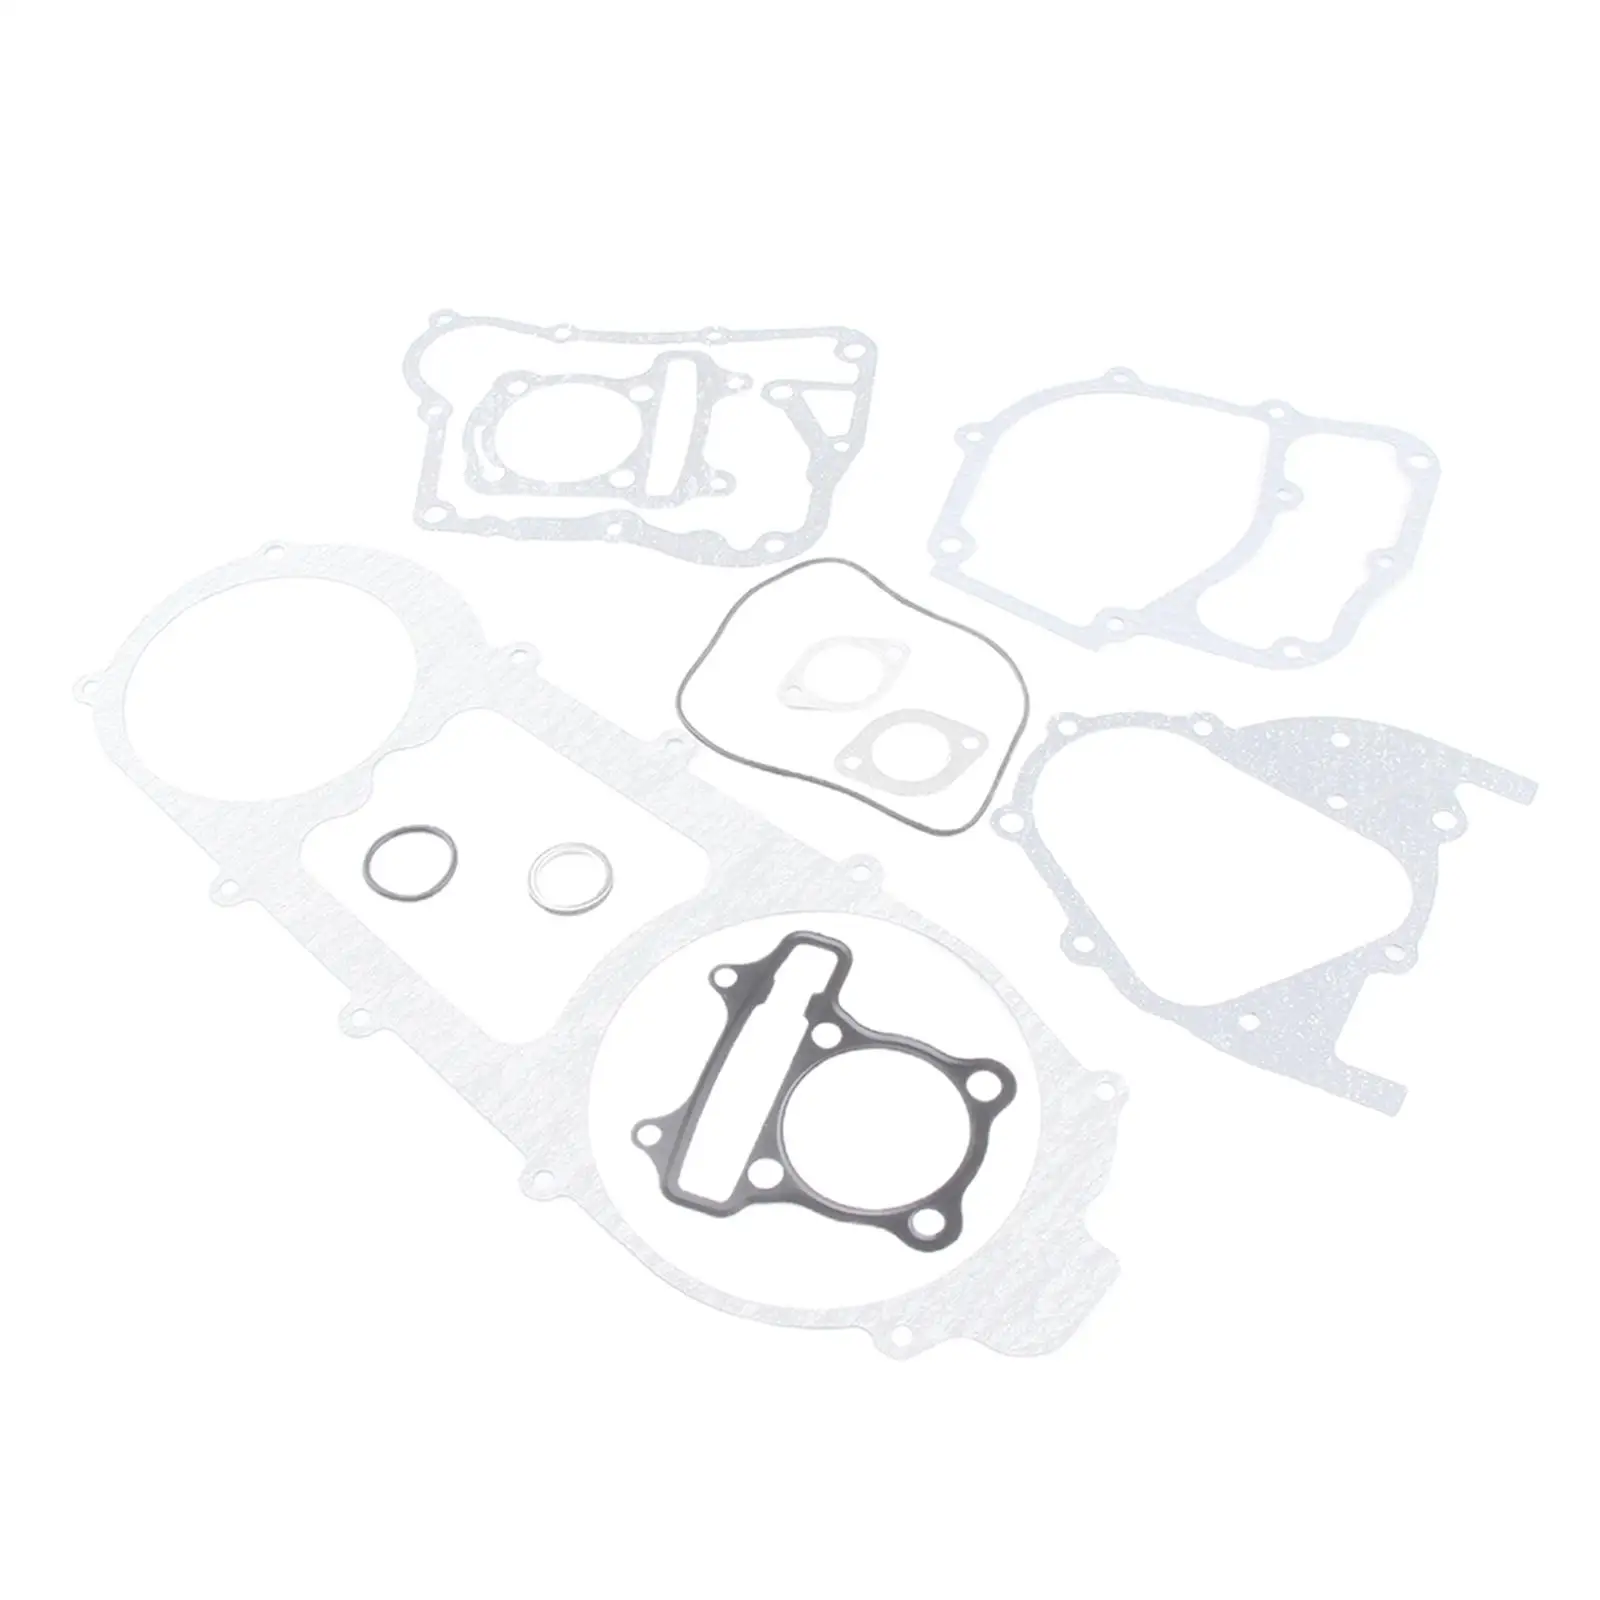 NEW Engine Head Gasket Set for GY6 150cc Moped Scooters  Go Karts Quad